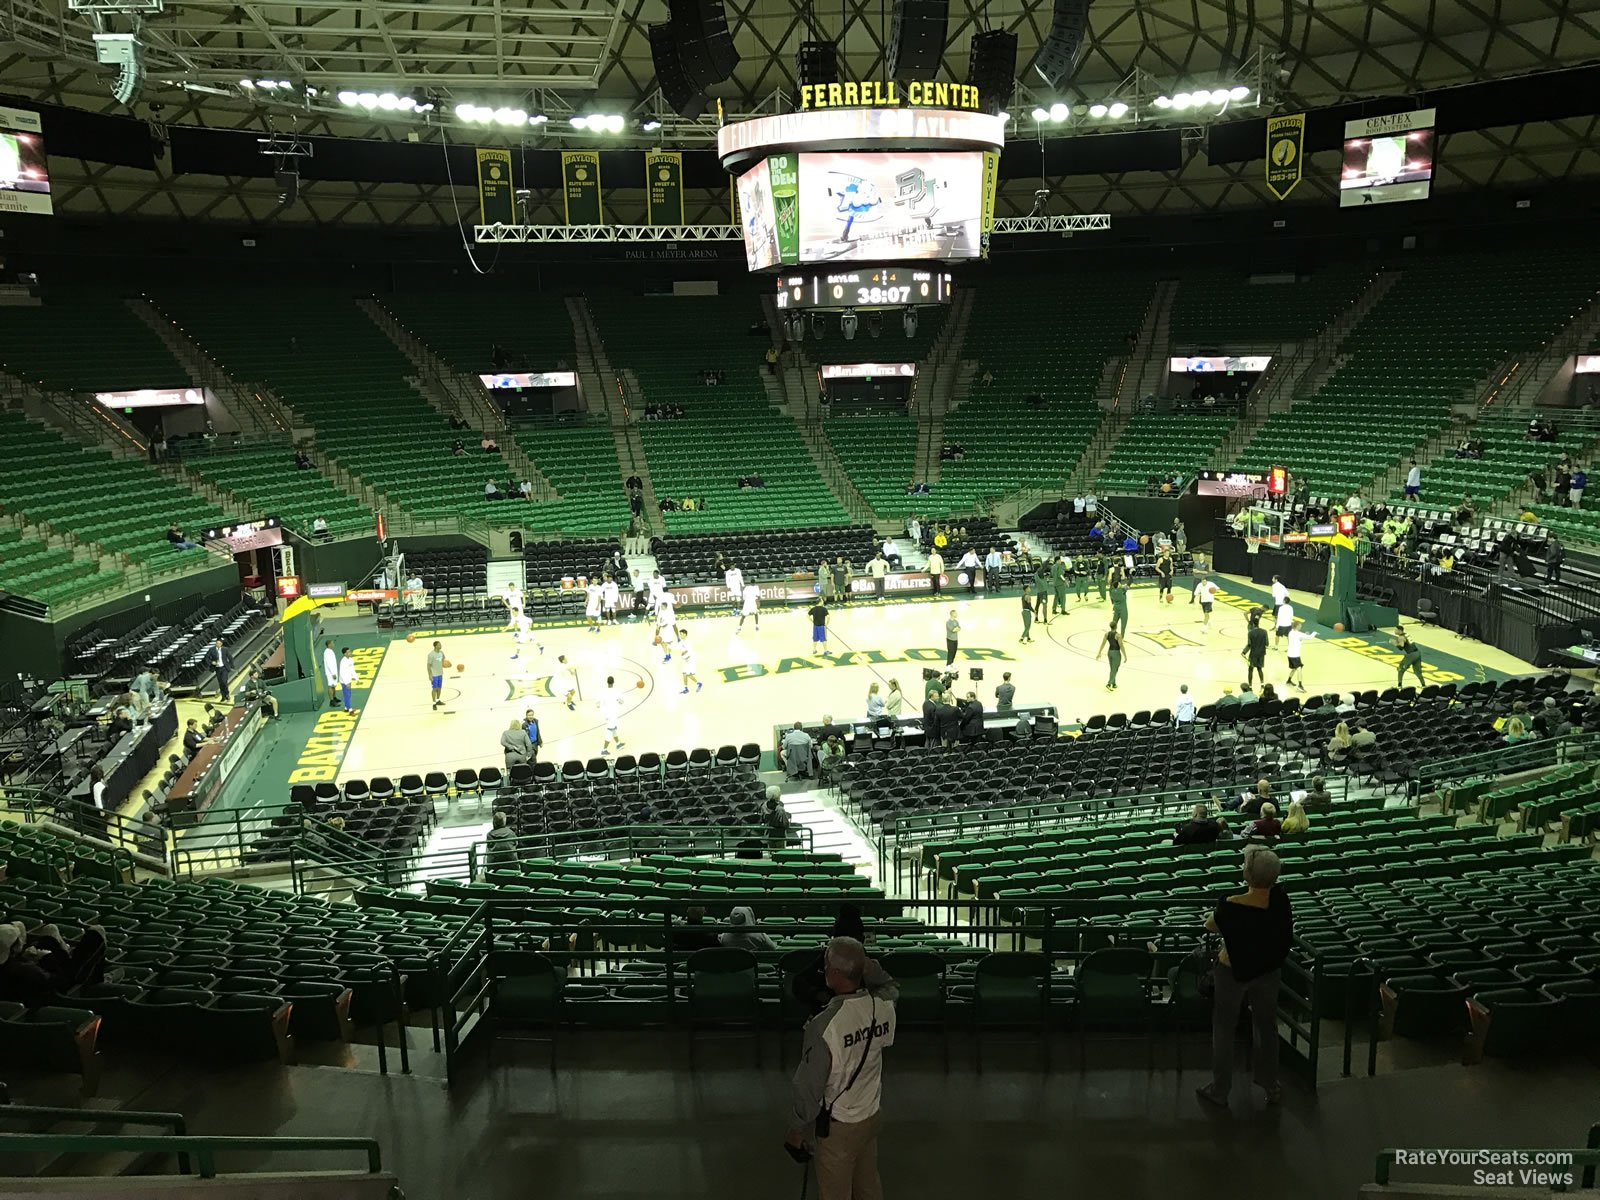 section 102, row 24 seat view  - ferrell center